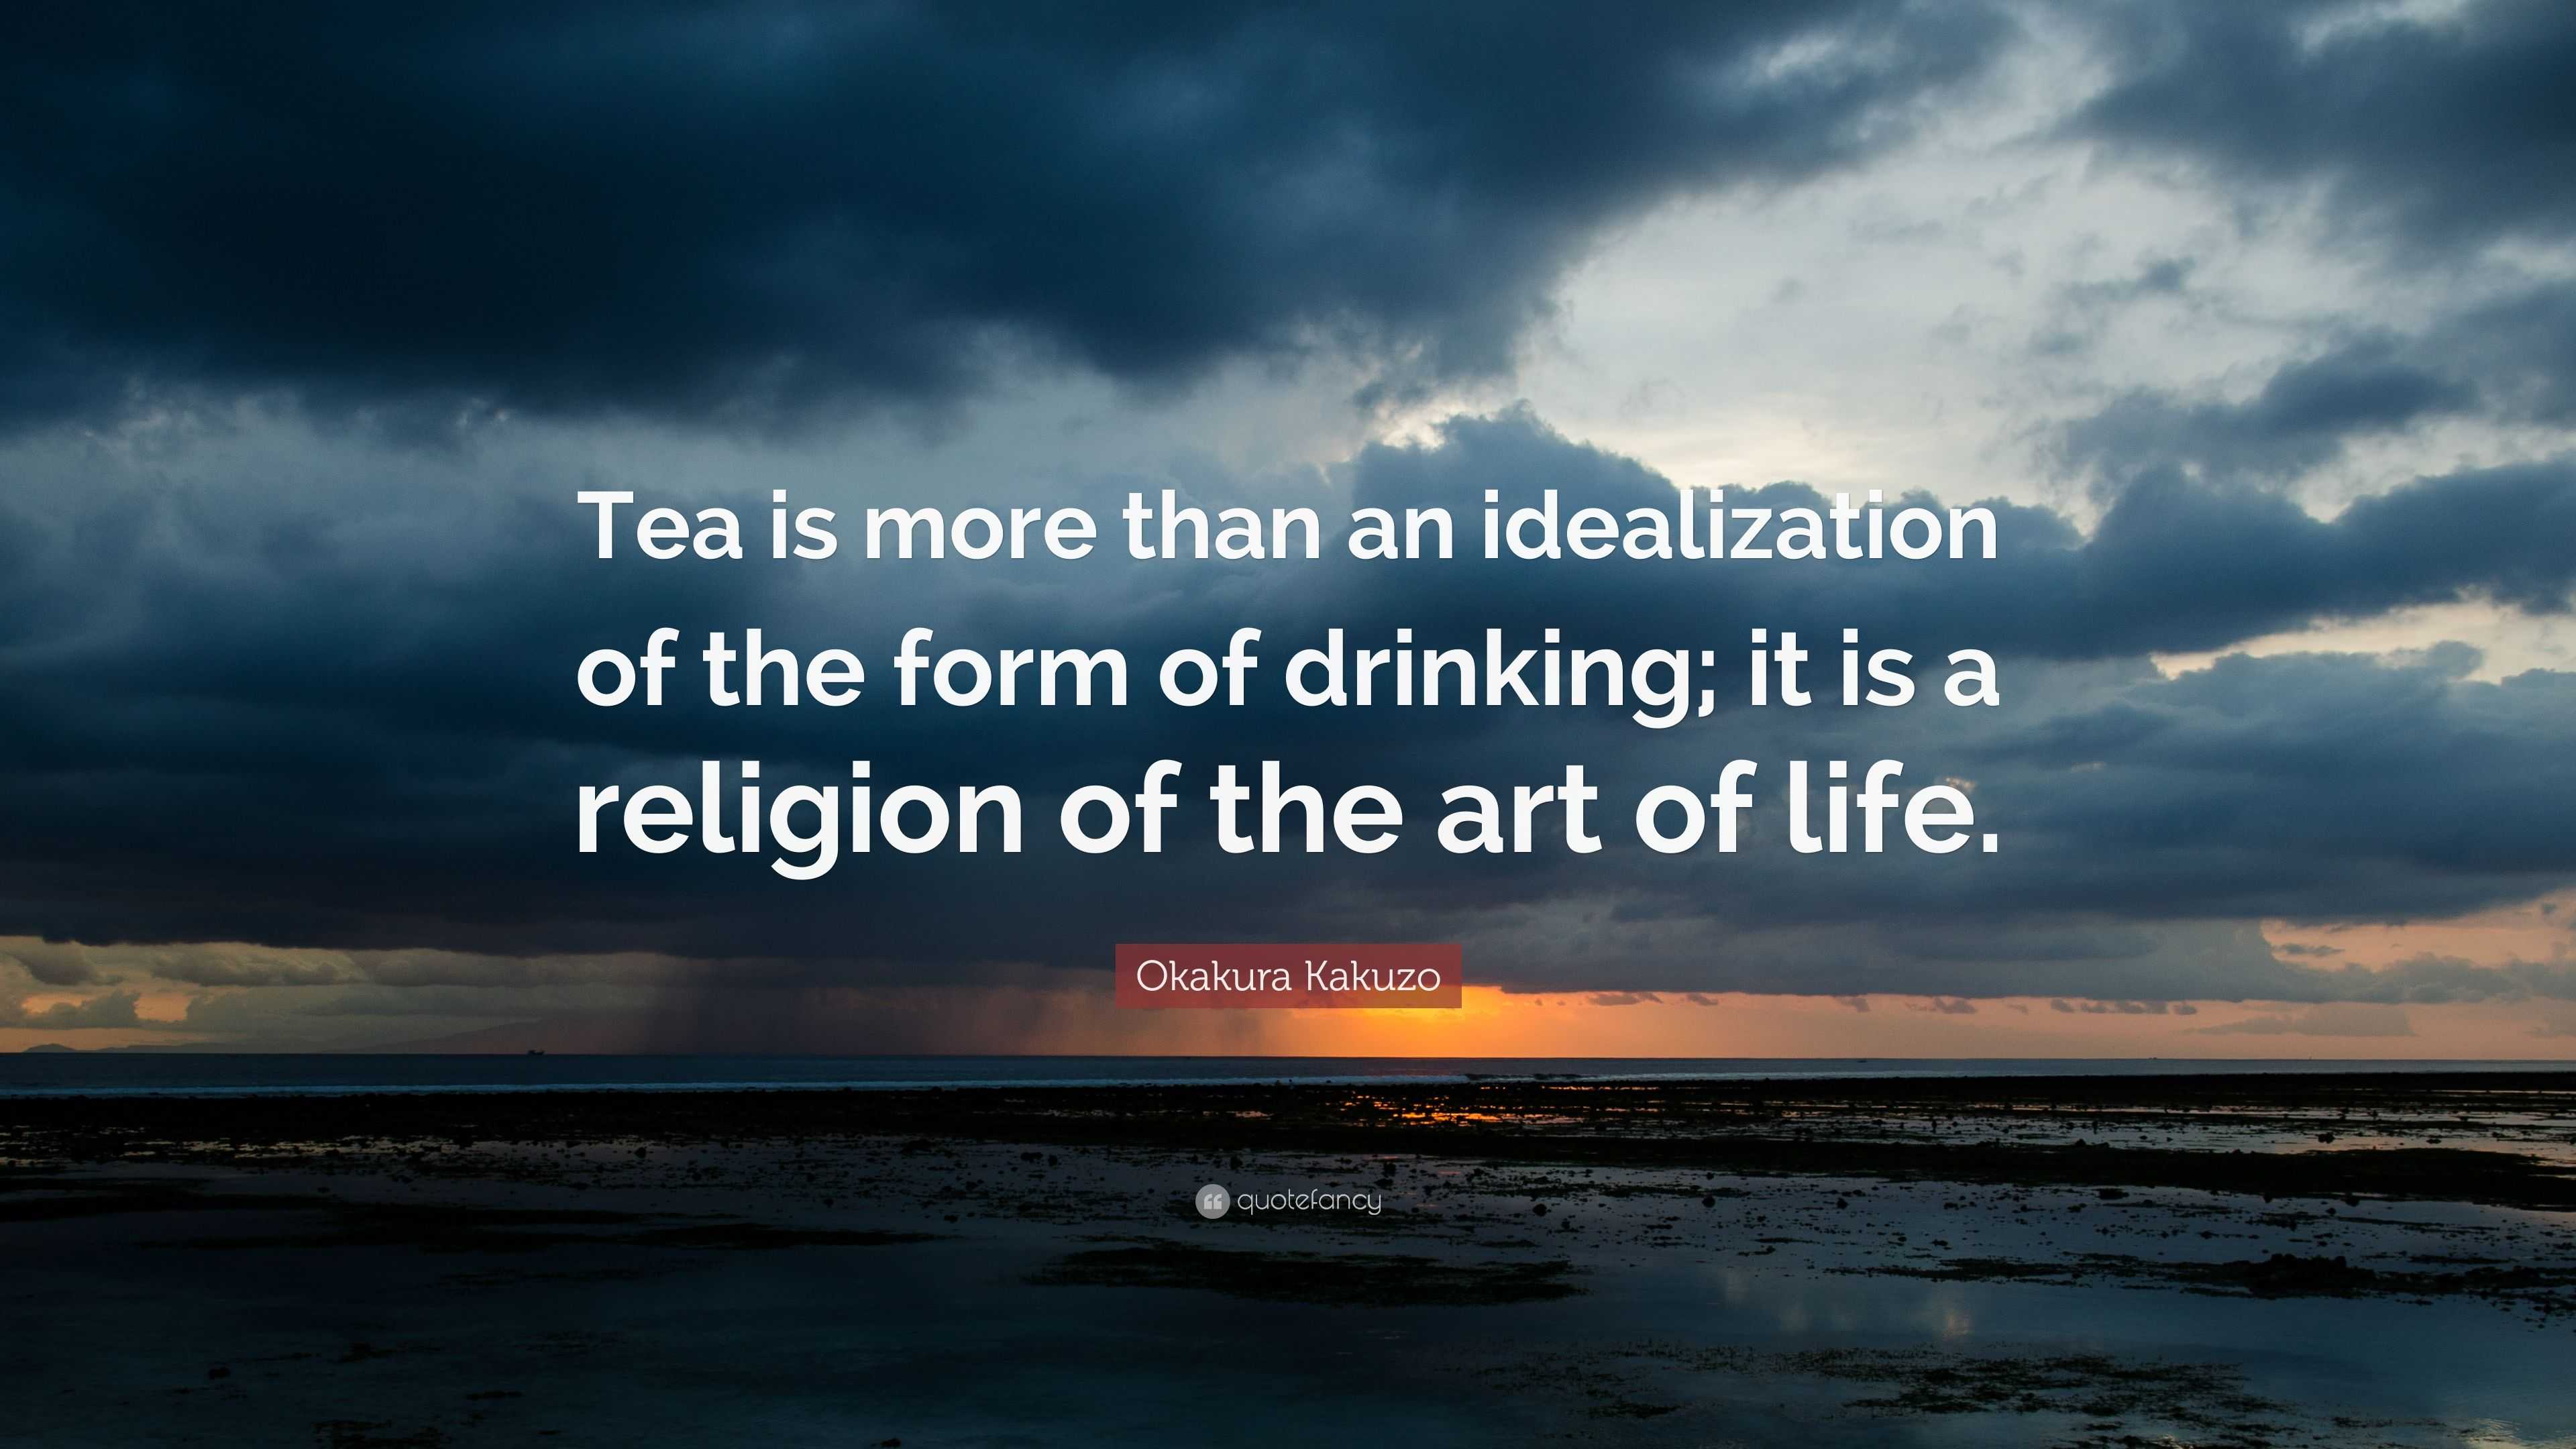 Okakura Kakuzo Quote Tea Is More Than An Idealization Of The Form Of Drinking It Is